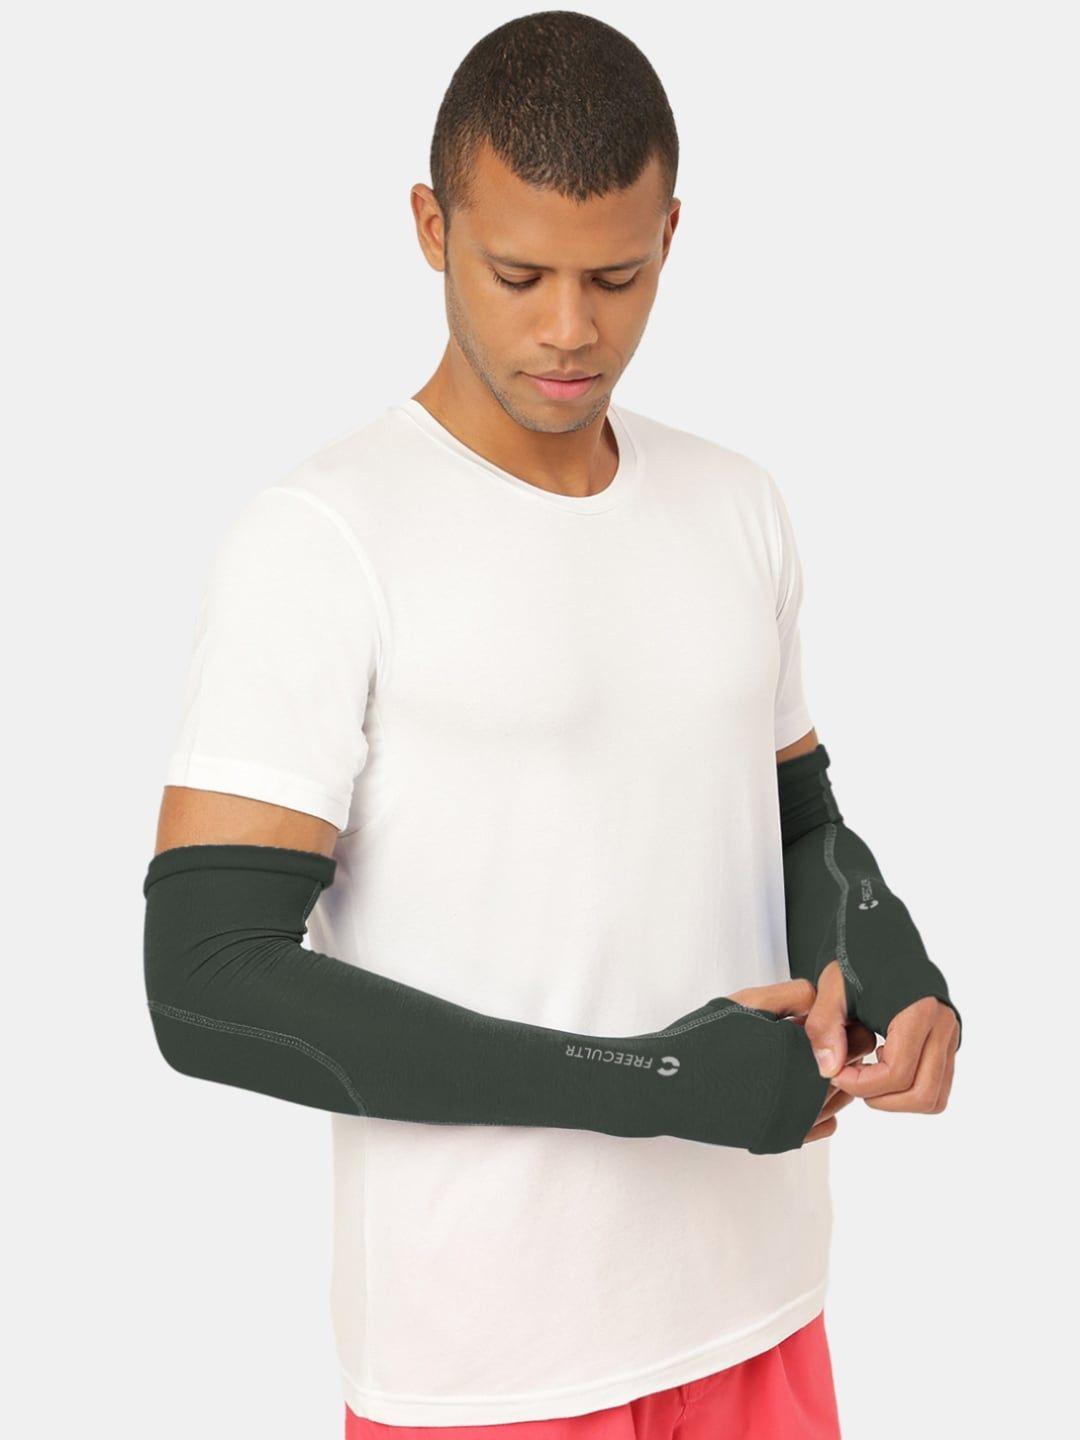 freecultr bamboo antibacterial arm sleeves with built glove